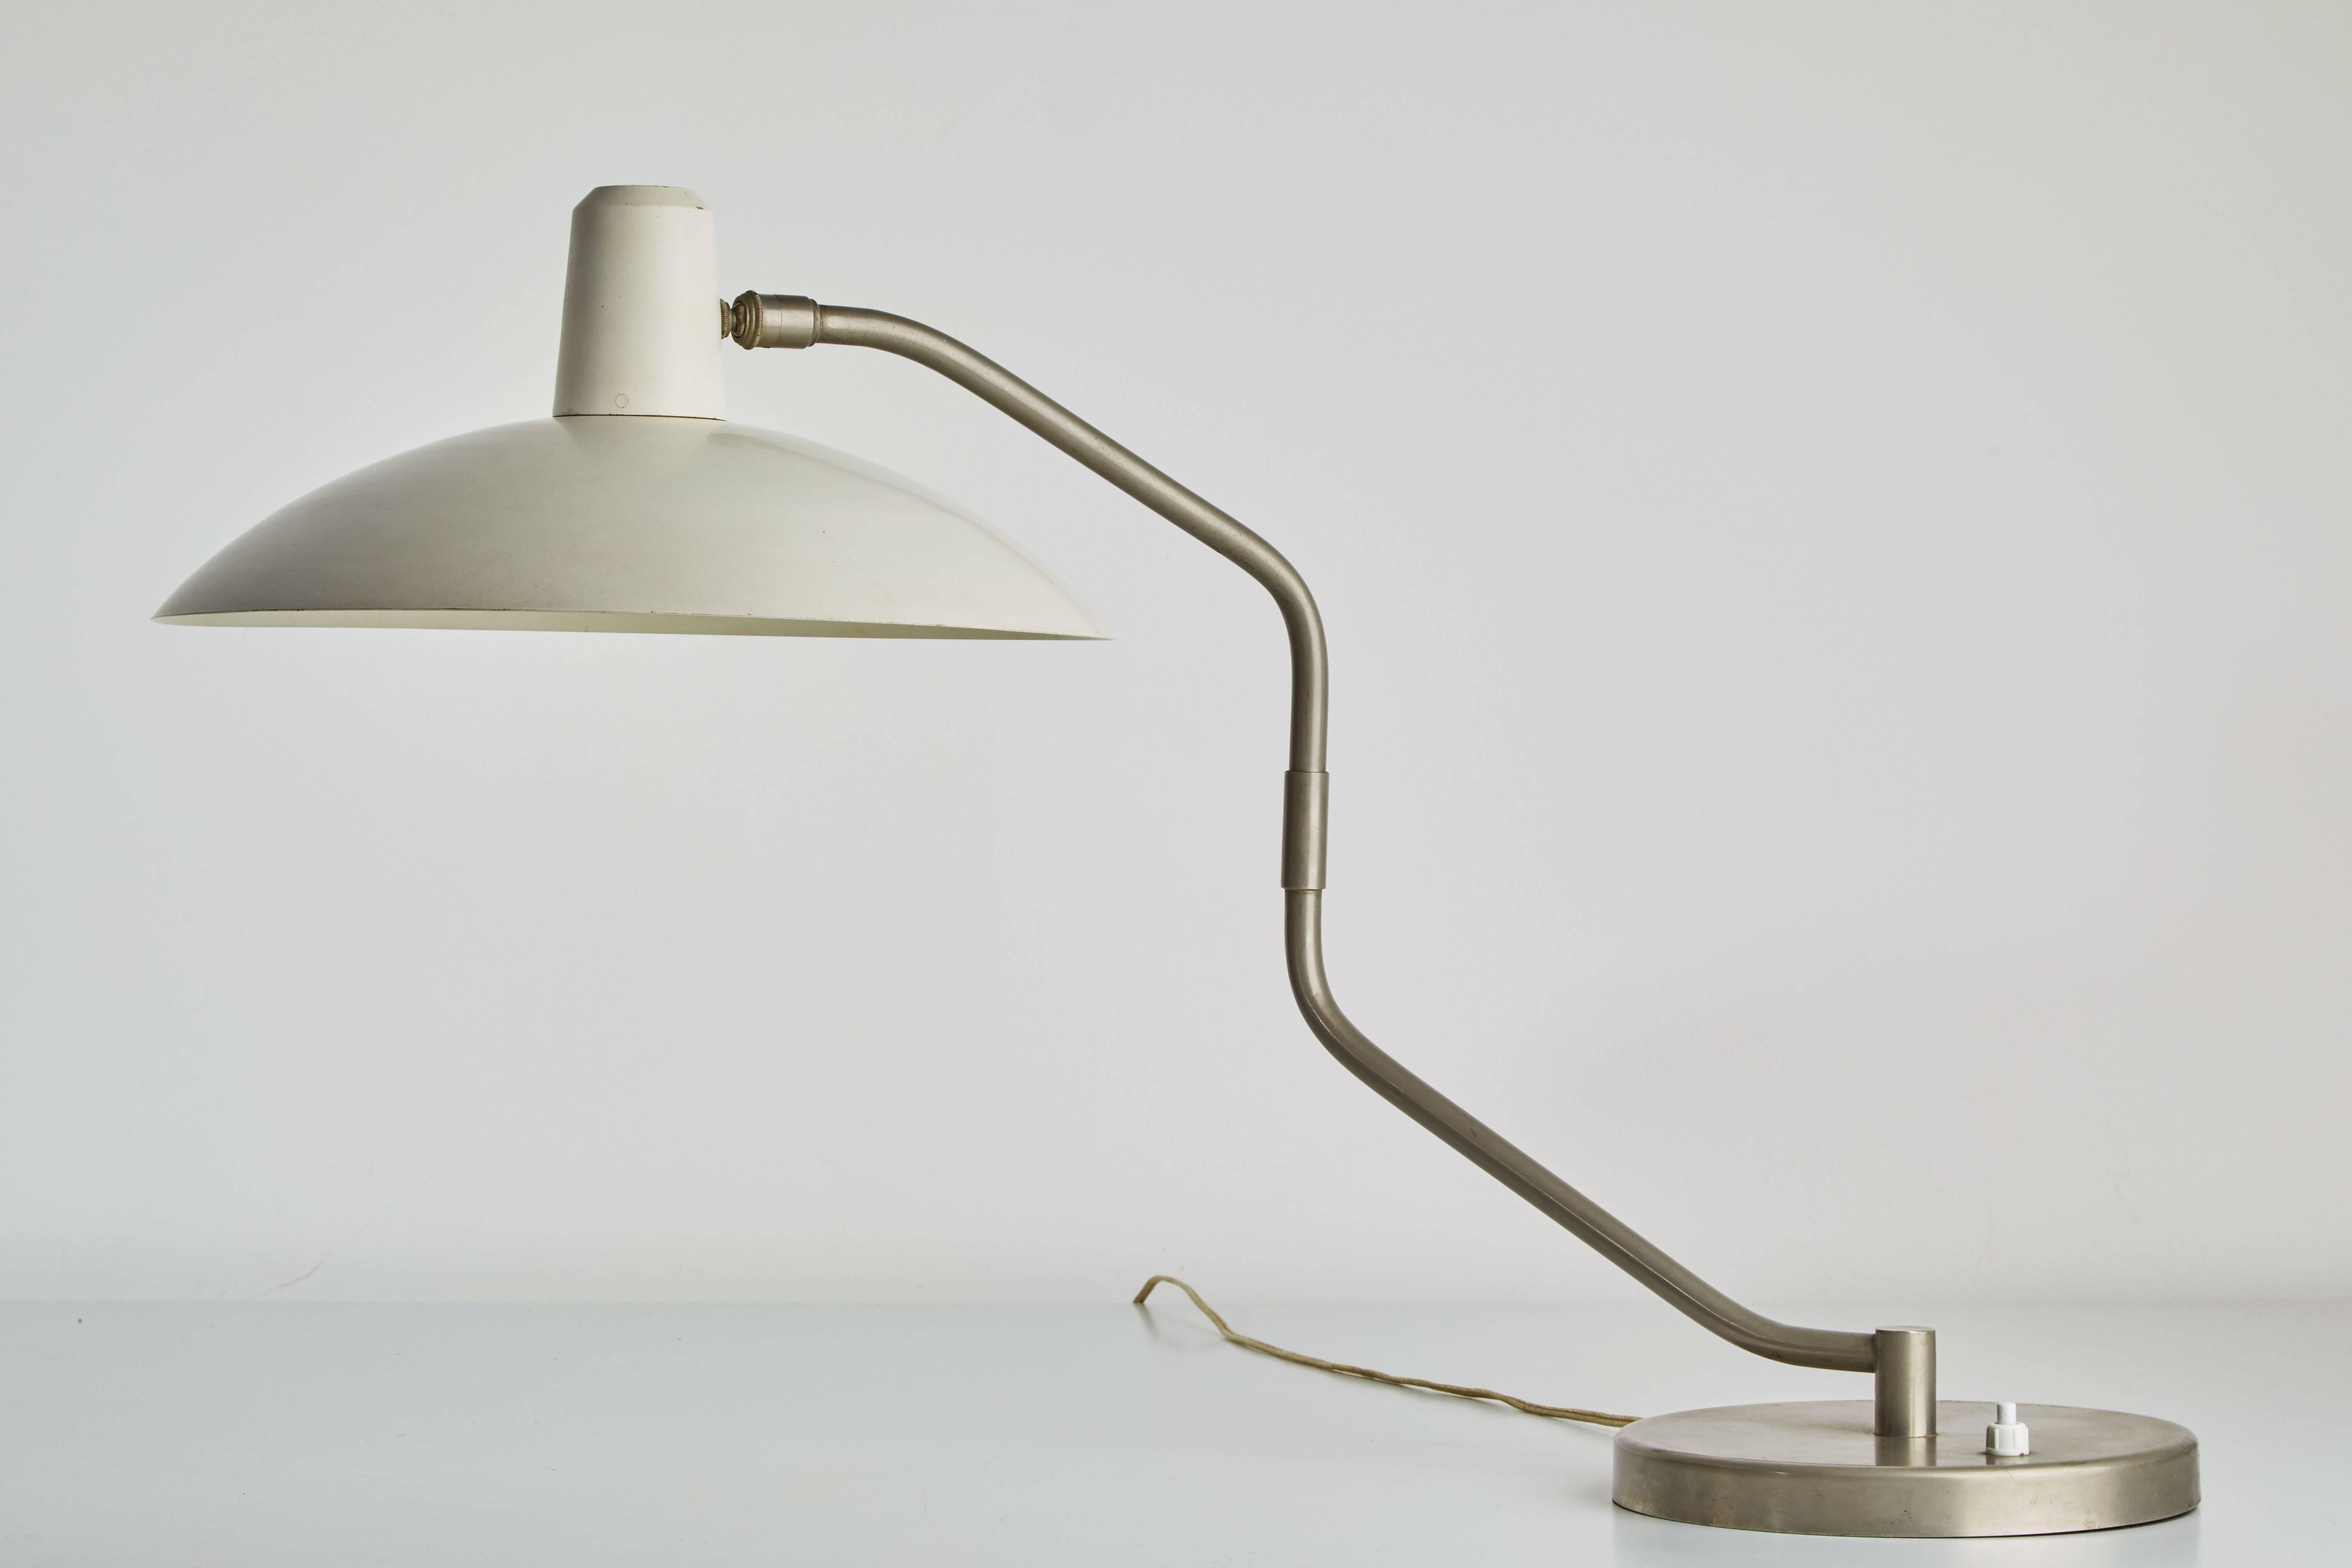 French No. 8 Table Lamp by Clay Michie for Regent Switzerland